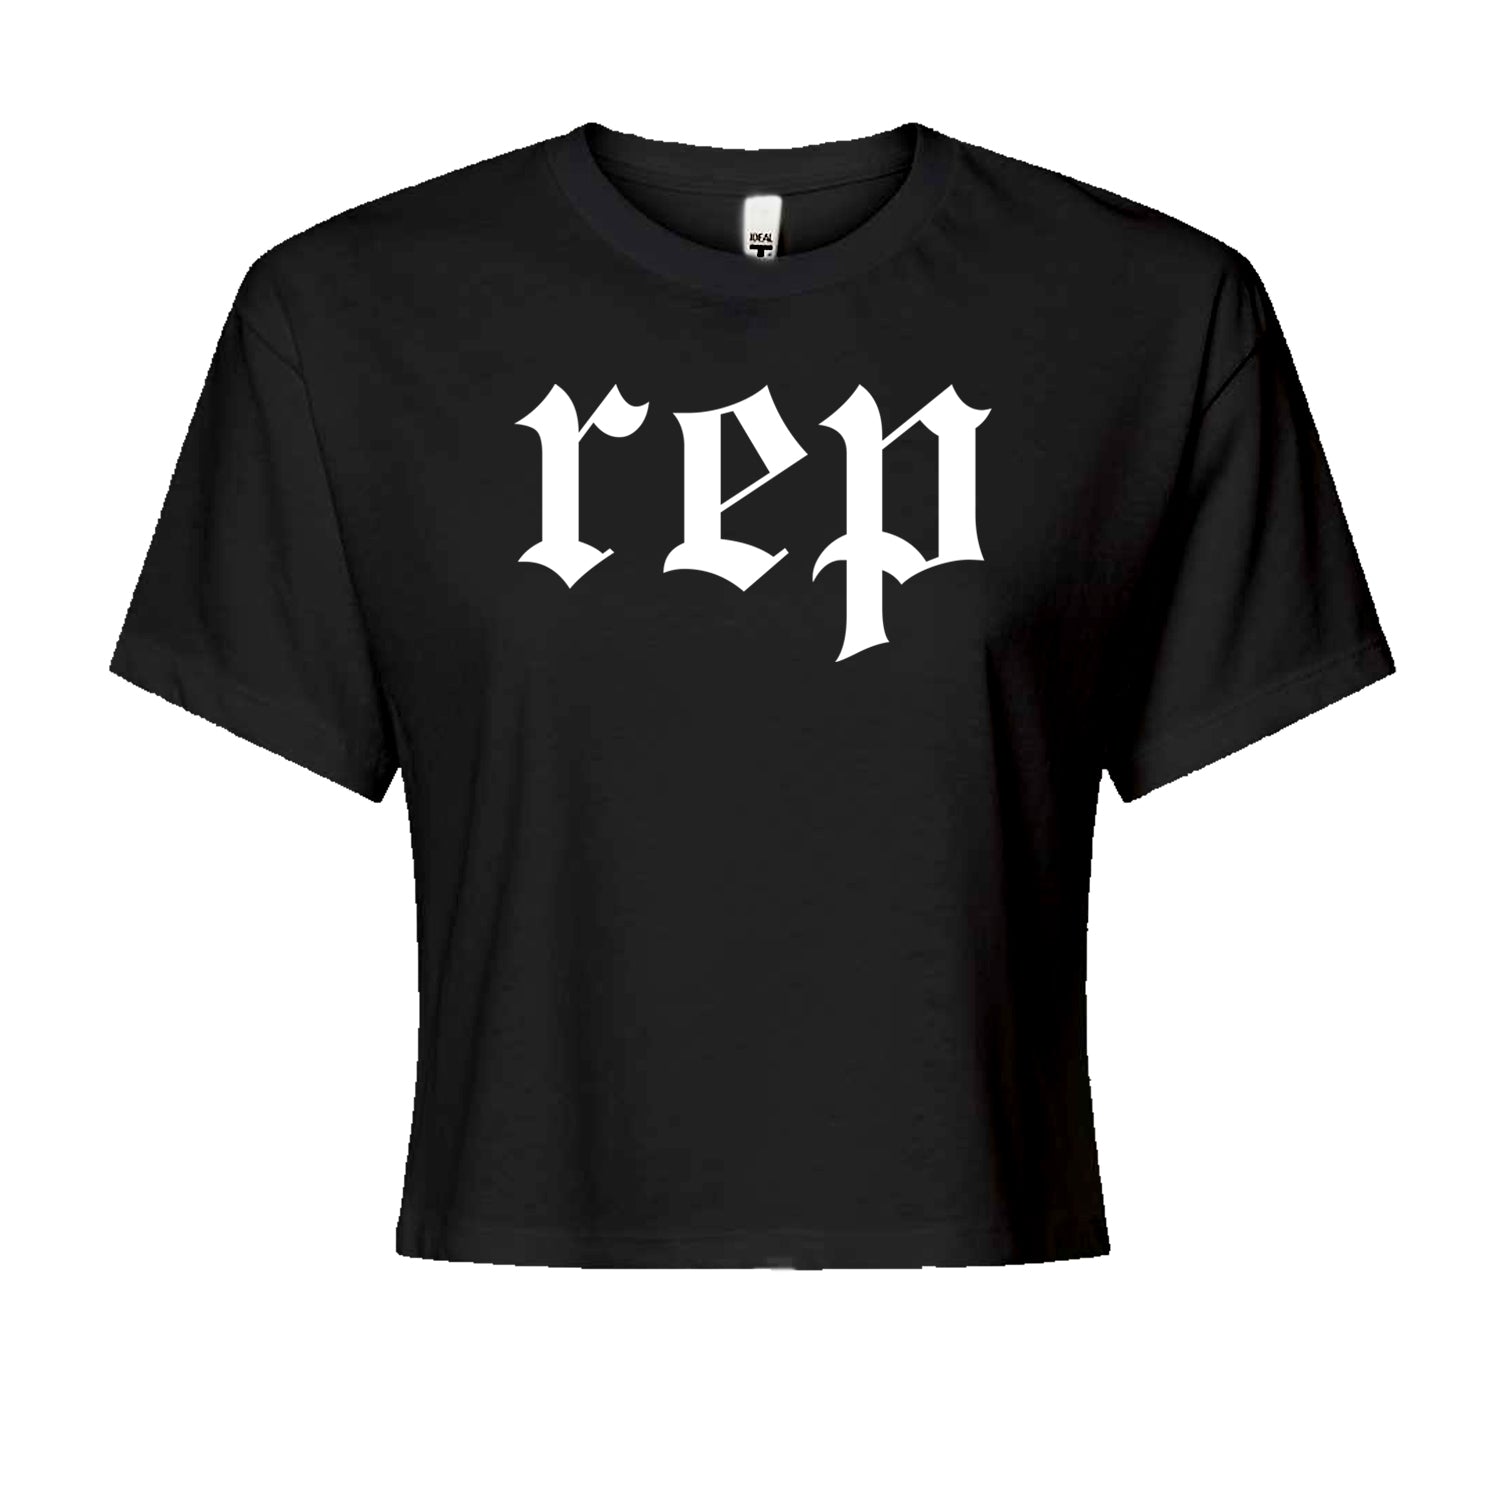 REP Reputation Music Lover Gift Fan Favorite Cropped T-Shirt